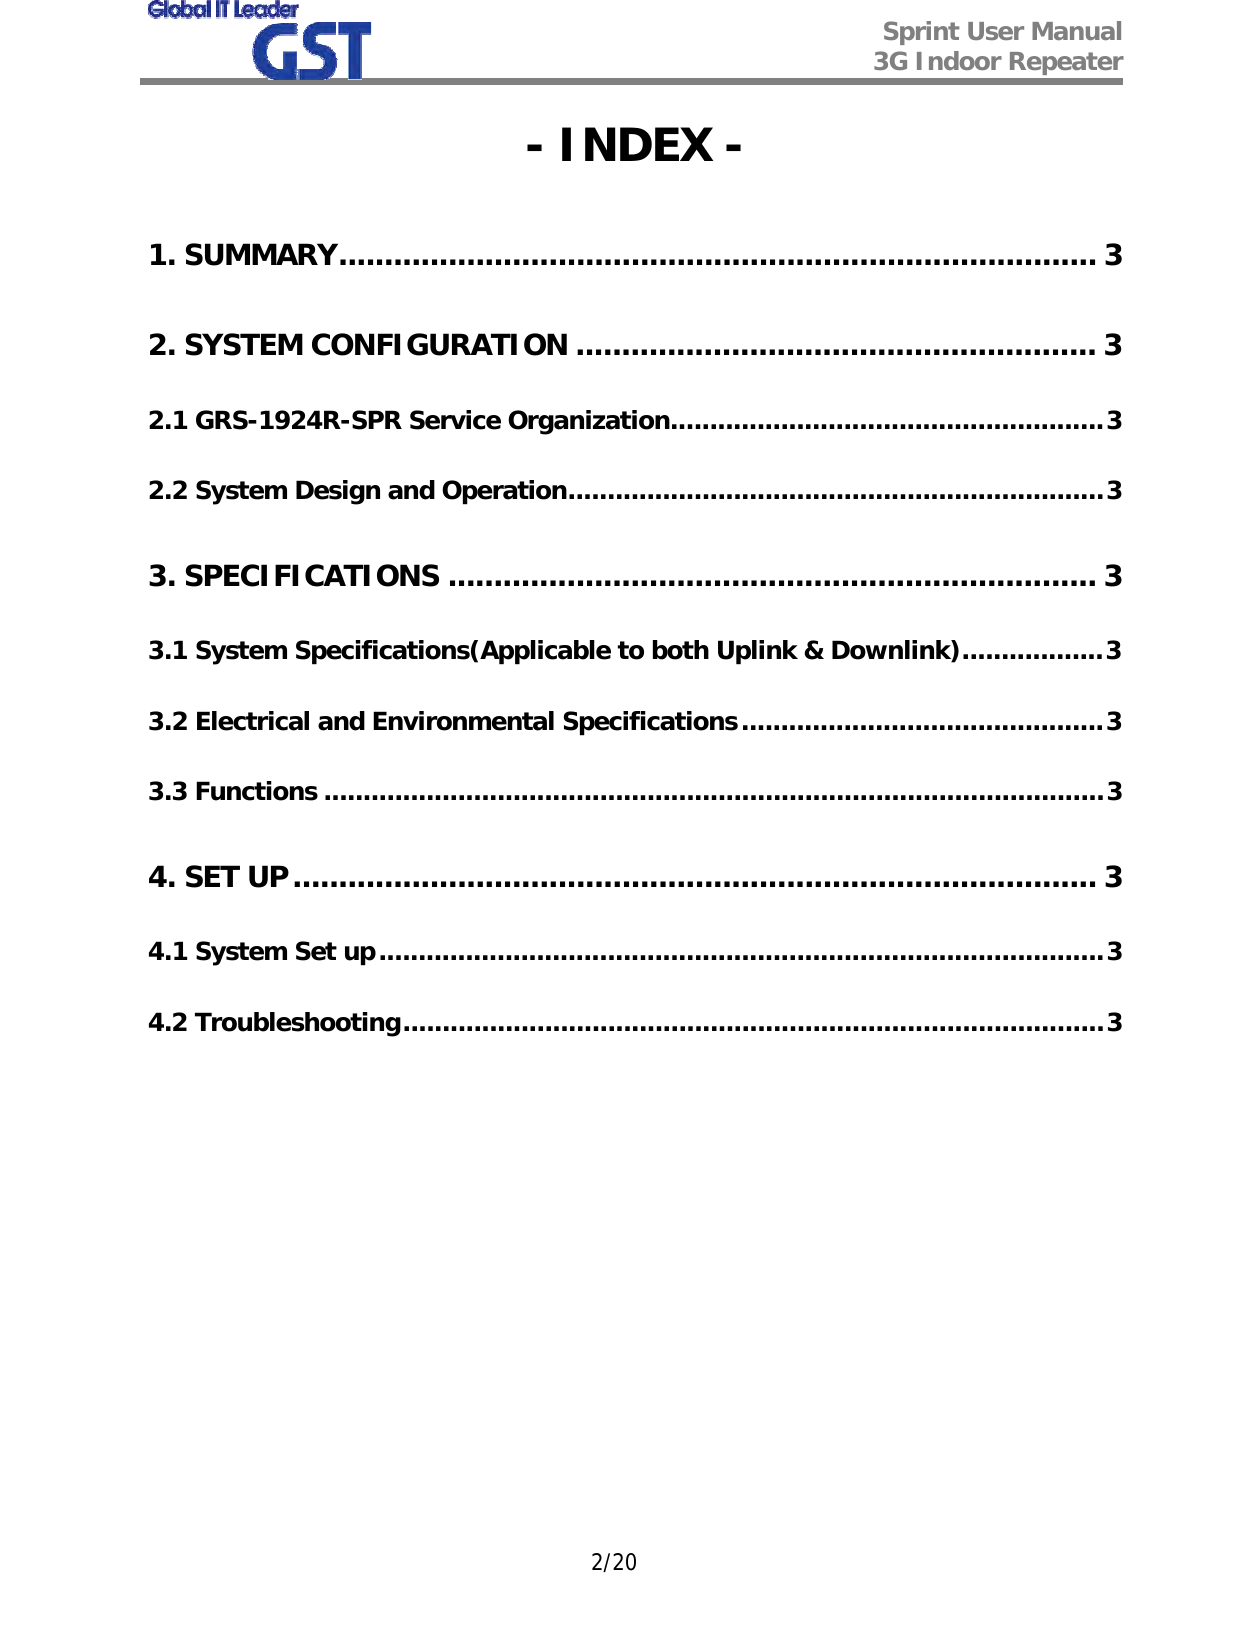  Sprint User Manual 3G Indoor Repeater   2/20 - INDEX - 1. SUMMARY................................................................................... 3 2. SYSTEM CONFIGURATION ......................................................... 3 2.1 GRS-1924R-SPR Service Organization.......................................................3 2.2 System Design and Operation....................................................................3 3. SPECIFICATIONS ....................................................................... 3 3.1 System Specifications(Applicable to both Uplink &amp; Downlink)..................3 3.2 Electrical and Environmental Specifications..............................................3 3.3 Functions ...................................................................................................3 4. SET UP........................................................................................ 3 4.1 System Set up............................................................................................3 4.2 Troubleshooting.........................................................................................3            